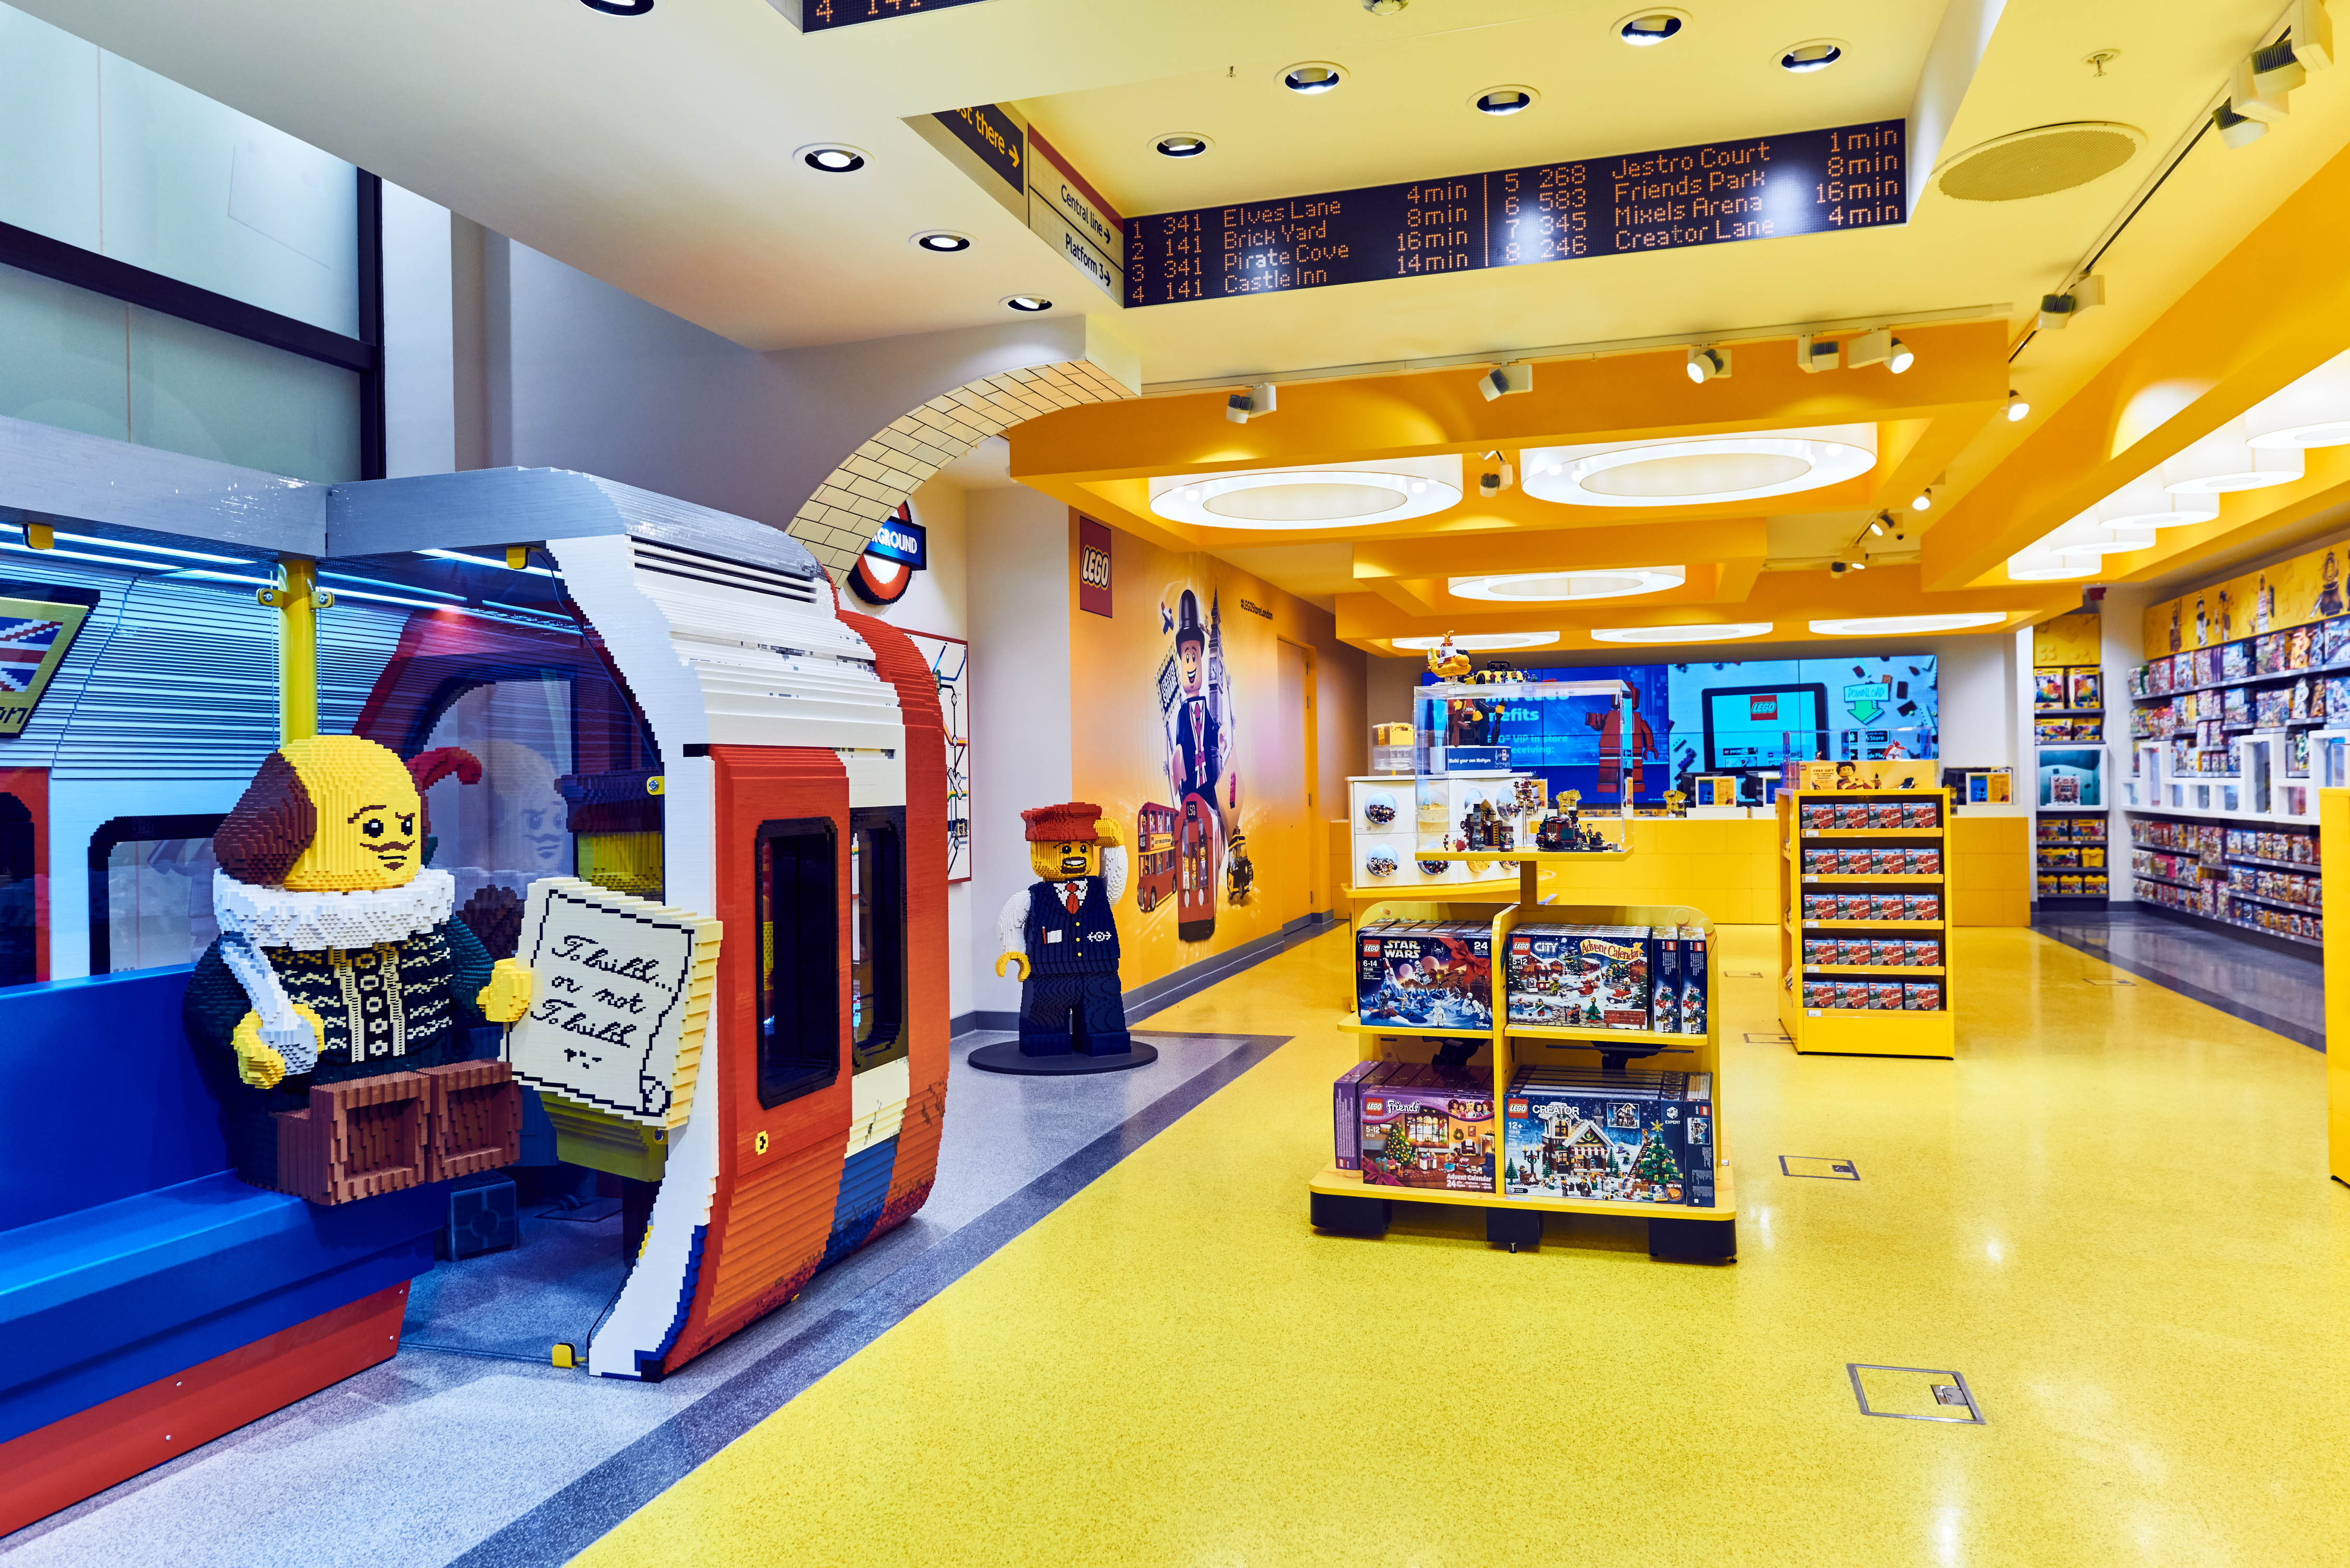 The interior of the store's ground floor. (Lego)